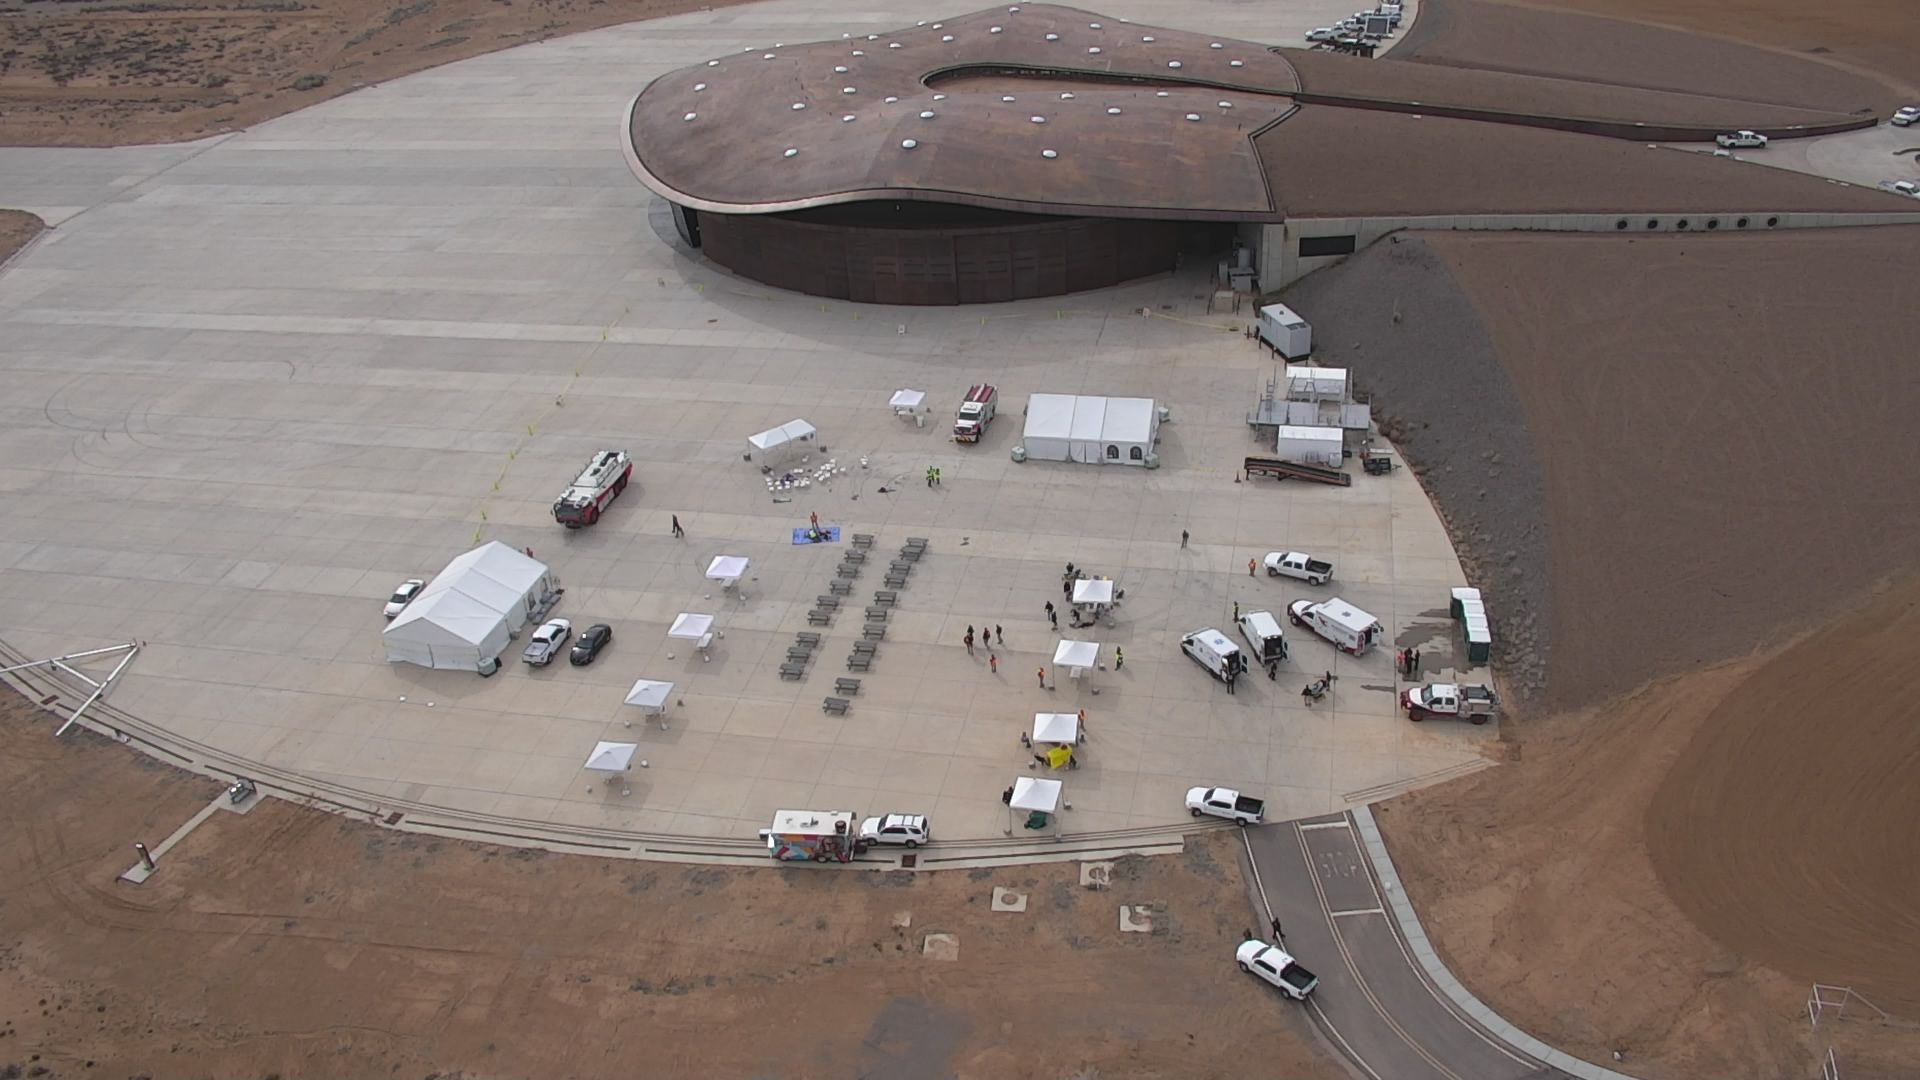 World's First Purpose-Built Commercial Spaceport, world record in New Mexico
